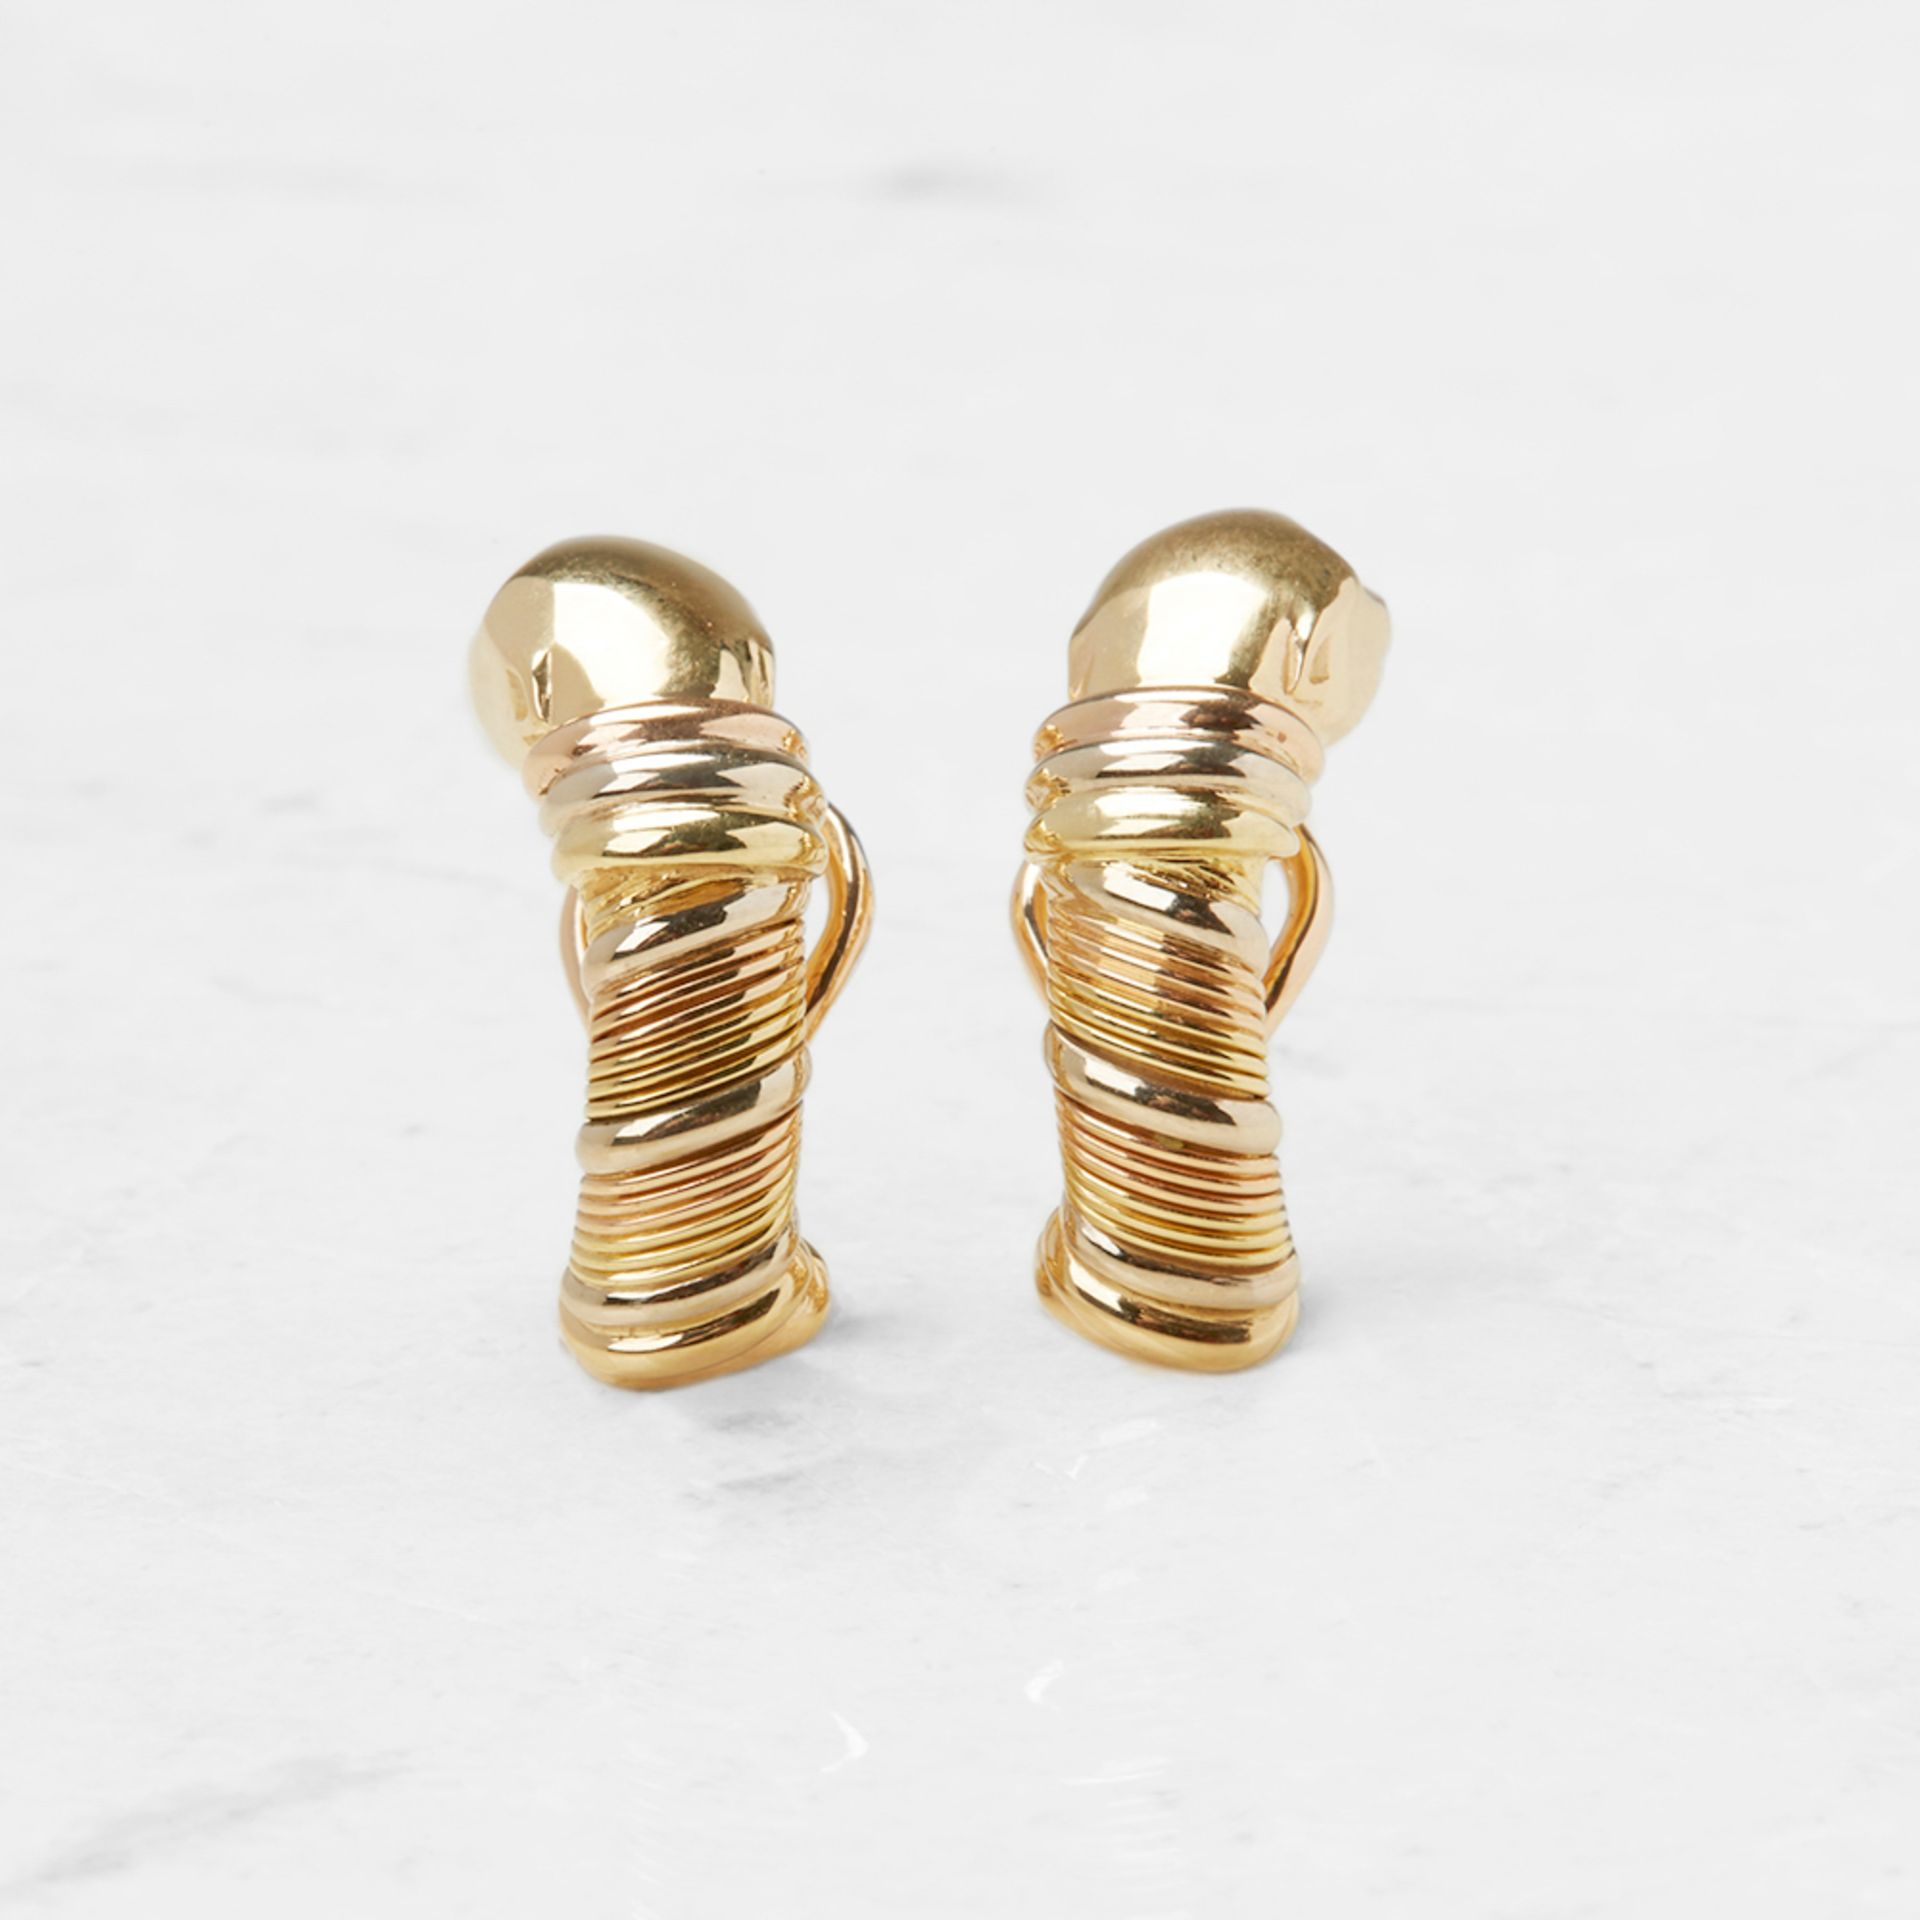 Cartier 18k Yellow Gold Panthère Earrings - Image 2 of 8